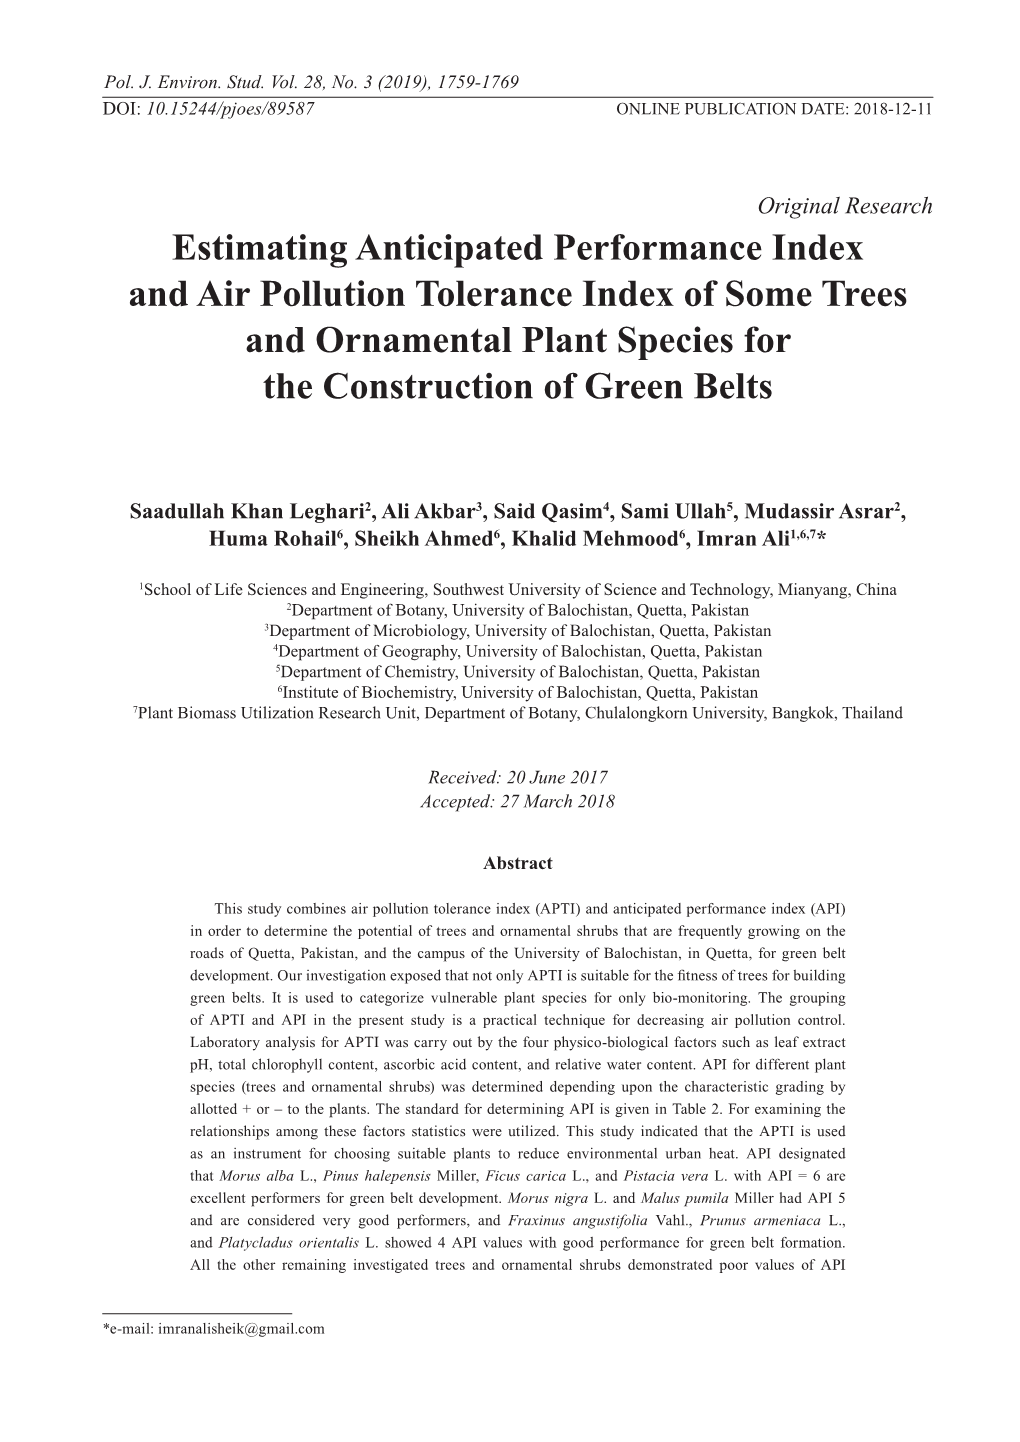 Estimating Anticipated Performance Index and Air Pollution Tolerance Index of Some Trees and Ornamental Plant Species for the Construction of Green Belts